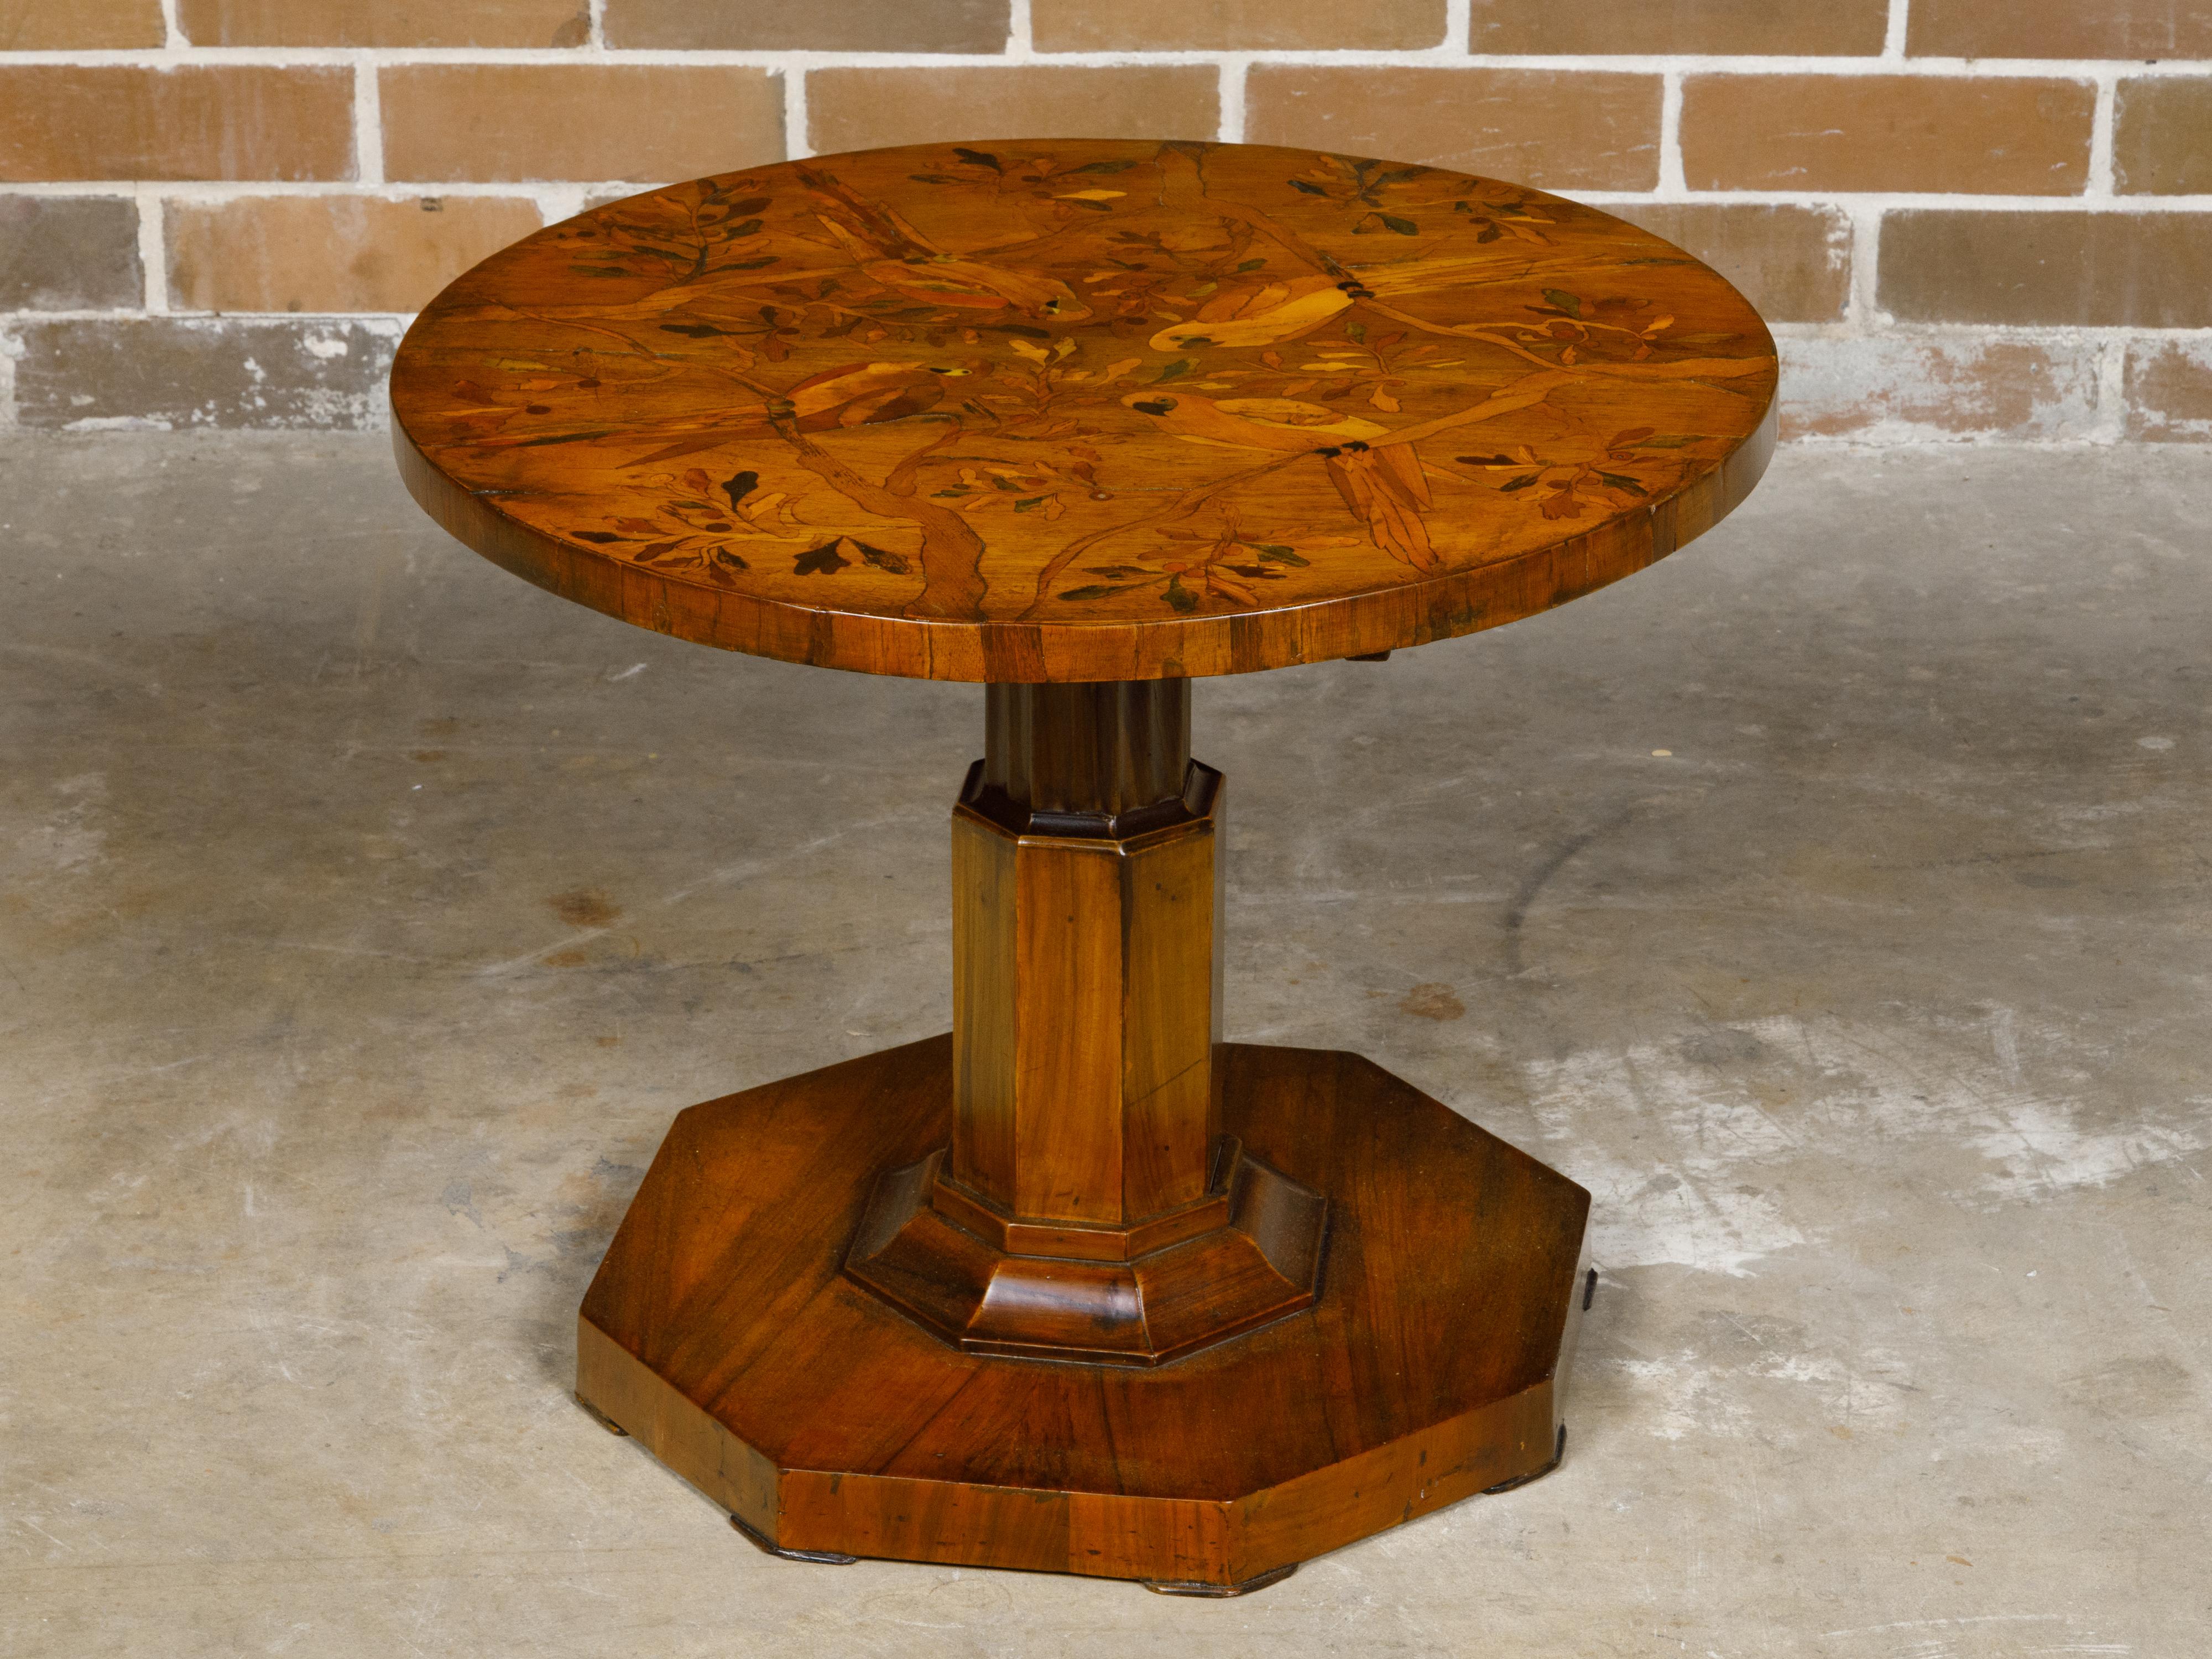 A Biedermeier period side table from the 19th century with parrots in branches marquetry and octagonal pedestal base. This Biedermeier period side table, hailing from the 19th century, is a splendid example of fine craftsmanship and artistic